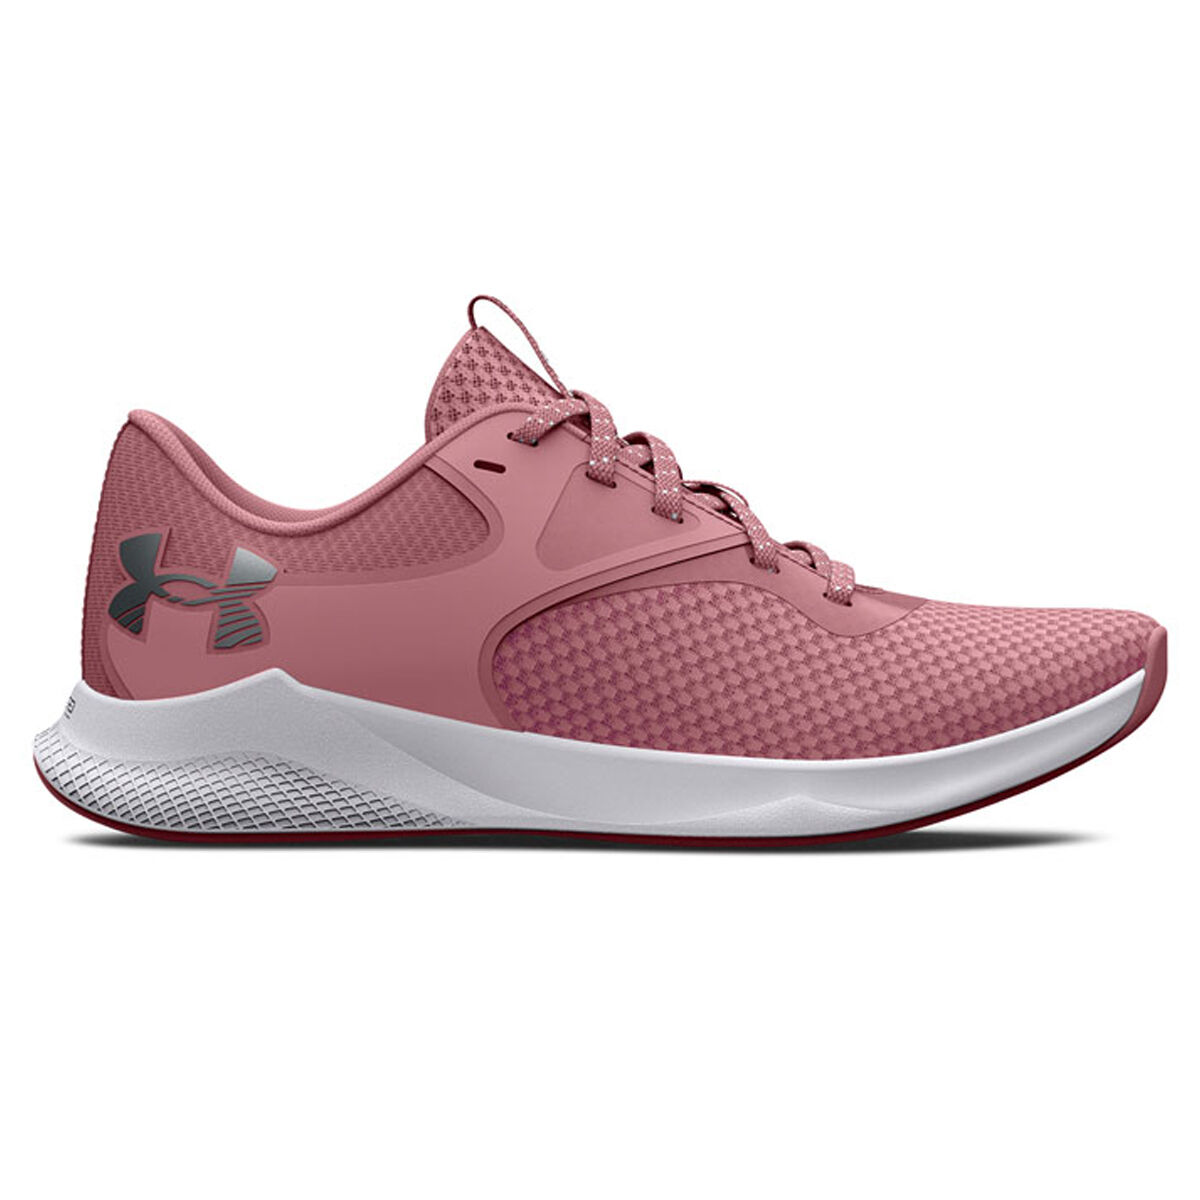 Under Armour Charged Aurora 2 Womens Running Shoes | Rebel Sport